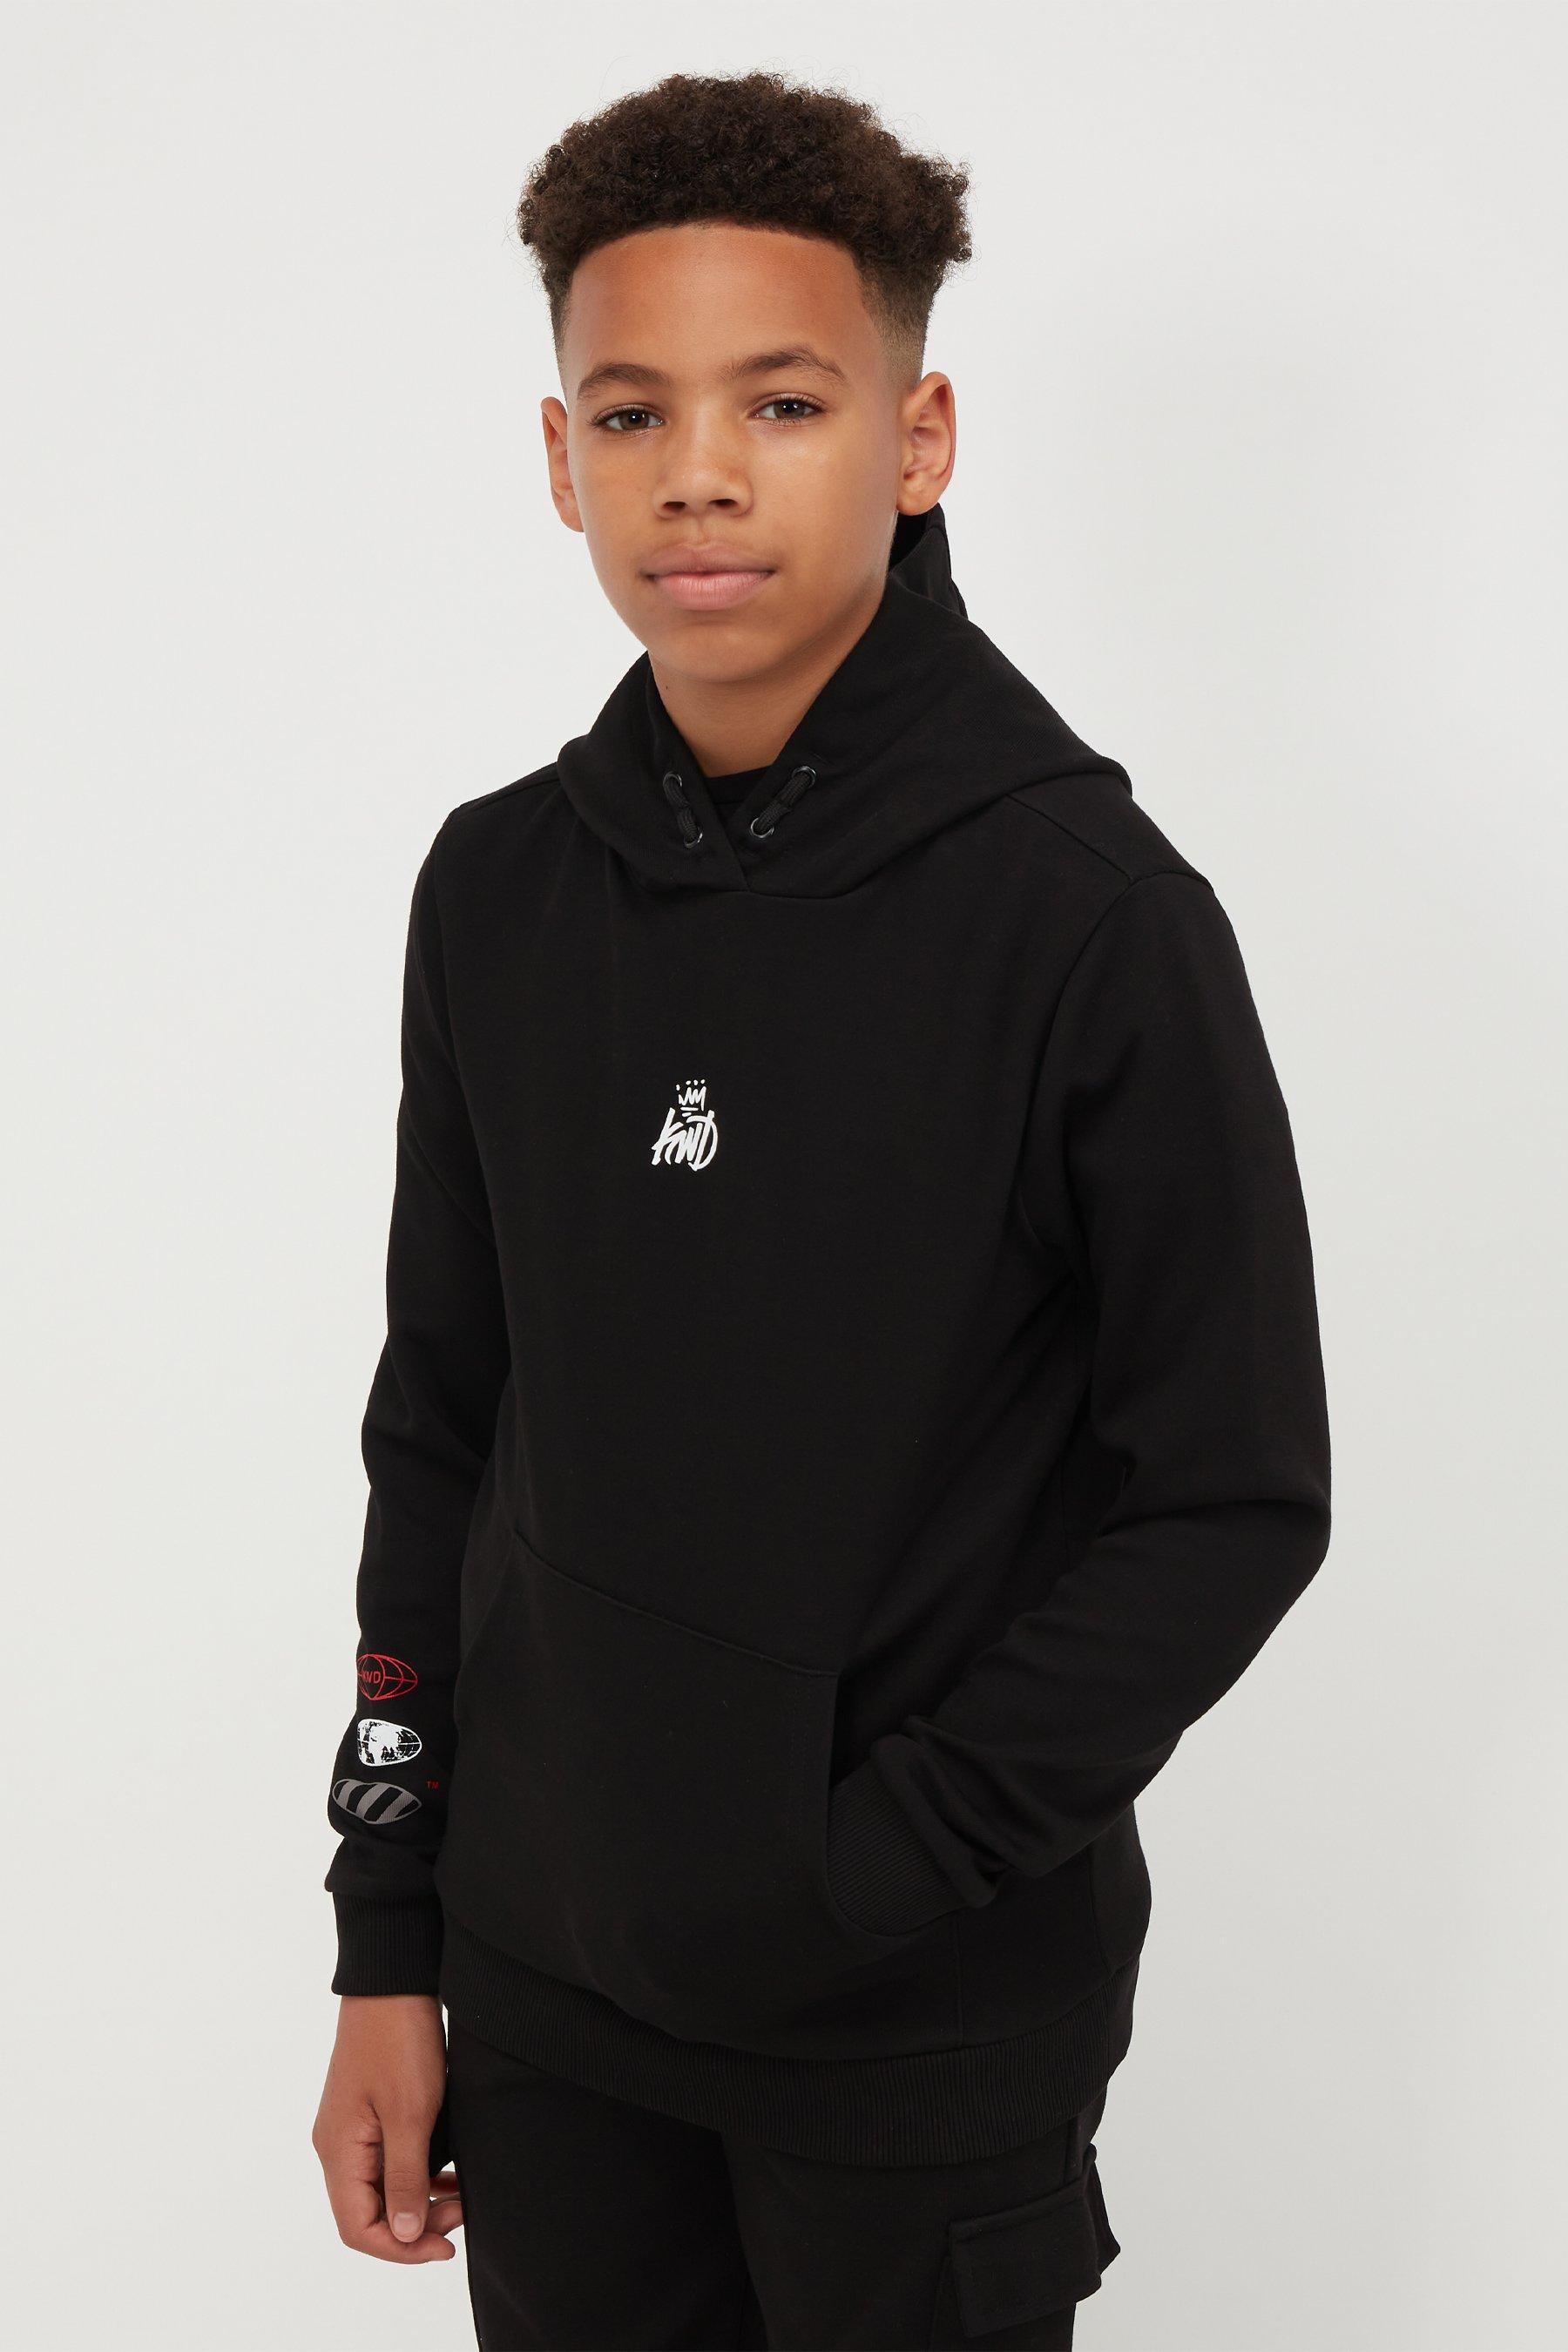 boys kings will dream beaumor 2.0 back graphic hoodie - black - size: 8-9 years - plain